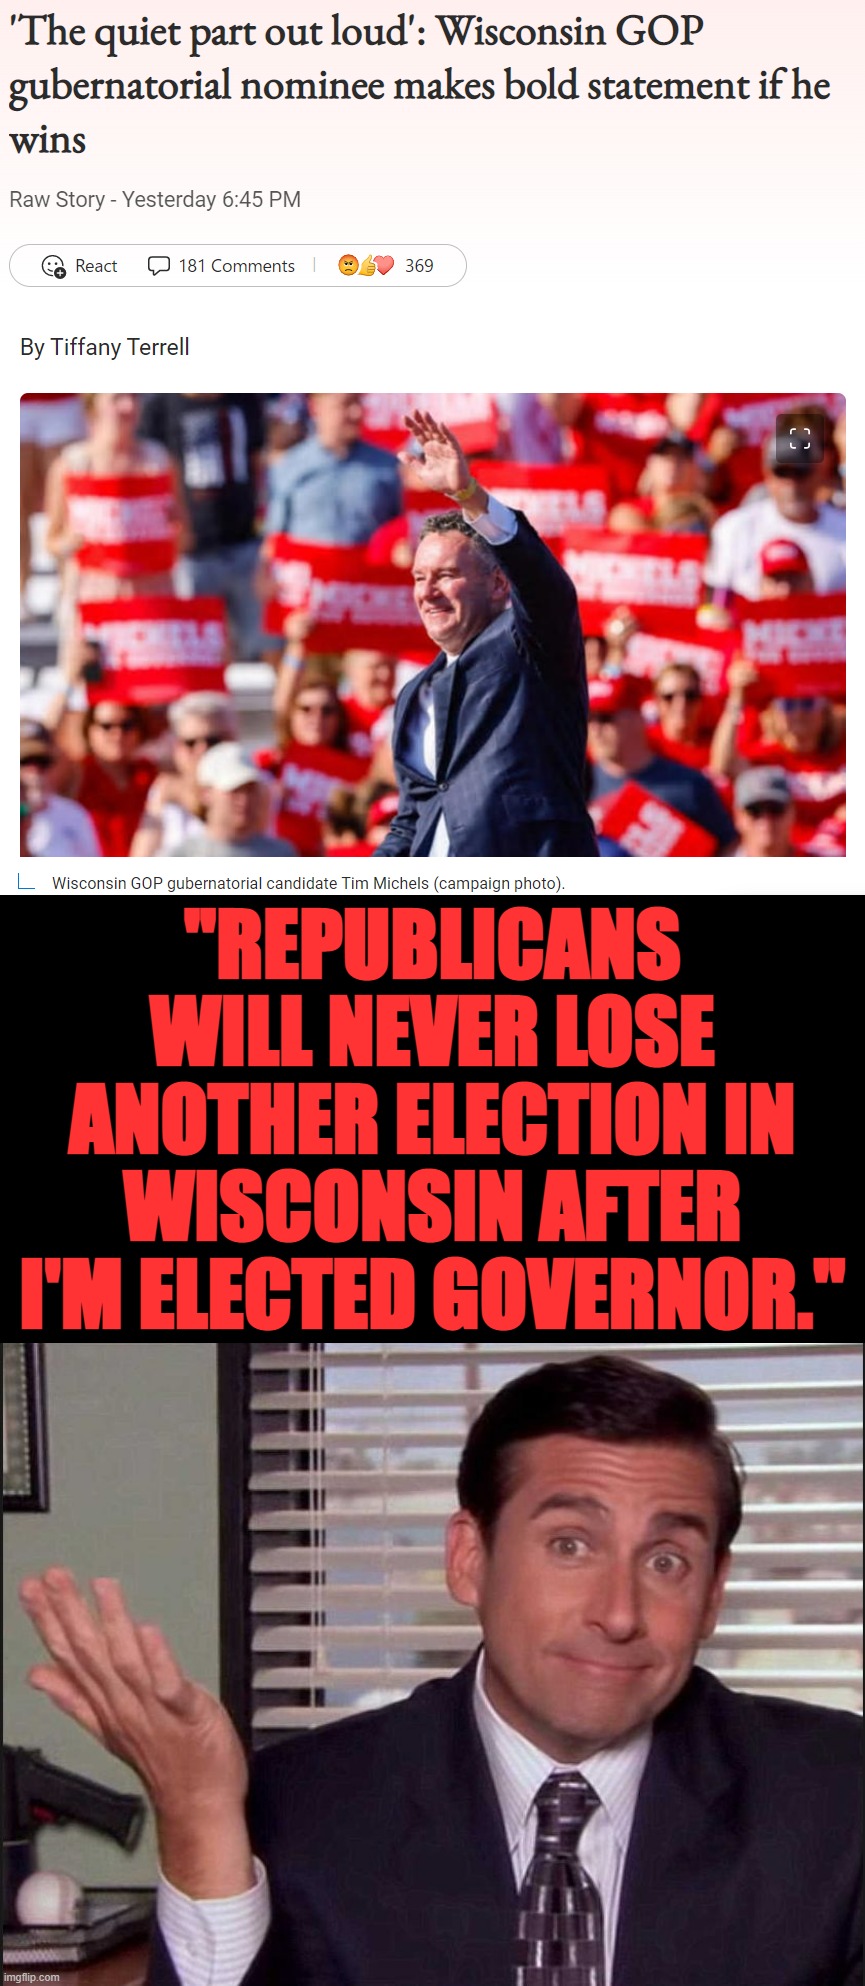 Welp, at least now they're finally admitting they're fascists | "REPUBLICANS WILL NEVER LOSE ANOTHER ELECTION IN WISCONSIN AFTER I'M ELECTED GOVERNOR." | image tagged in wisconsin gop fascist governor candidate,michael scott,republicans,fascists,elections,election fraud | made w/ Imgflip meme maker